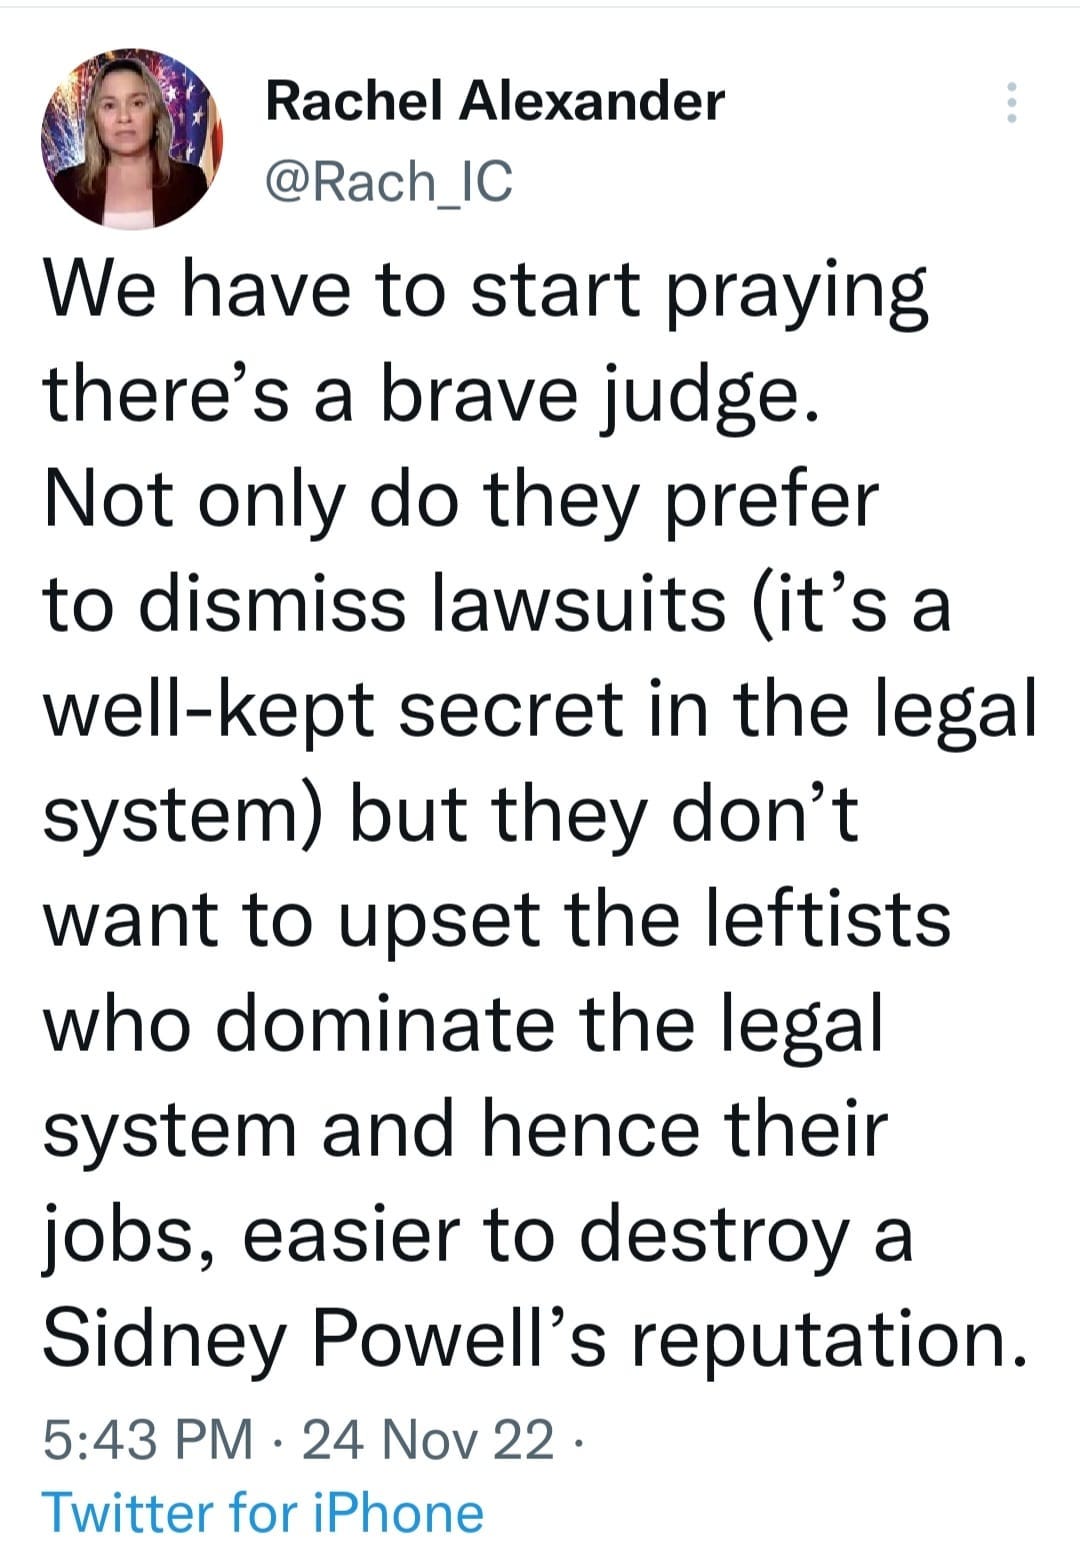 May be an image of 1 person and text that says 'Rachel Alexander @Rach_IC We have to start praying there's a brave judge. Not only do they prefer to dismiss lawsuits (it's a well-kept secret in the legal system) but they don't want to upset the leftists who dominate the legal system and hence their jobs, easier to destroy a Sidney Powell's reputation. 5:43 PM 24 Nov 22. • Twitter for iPhone'